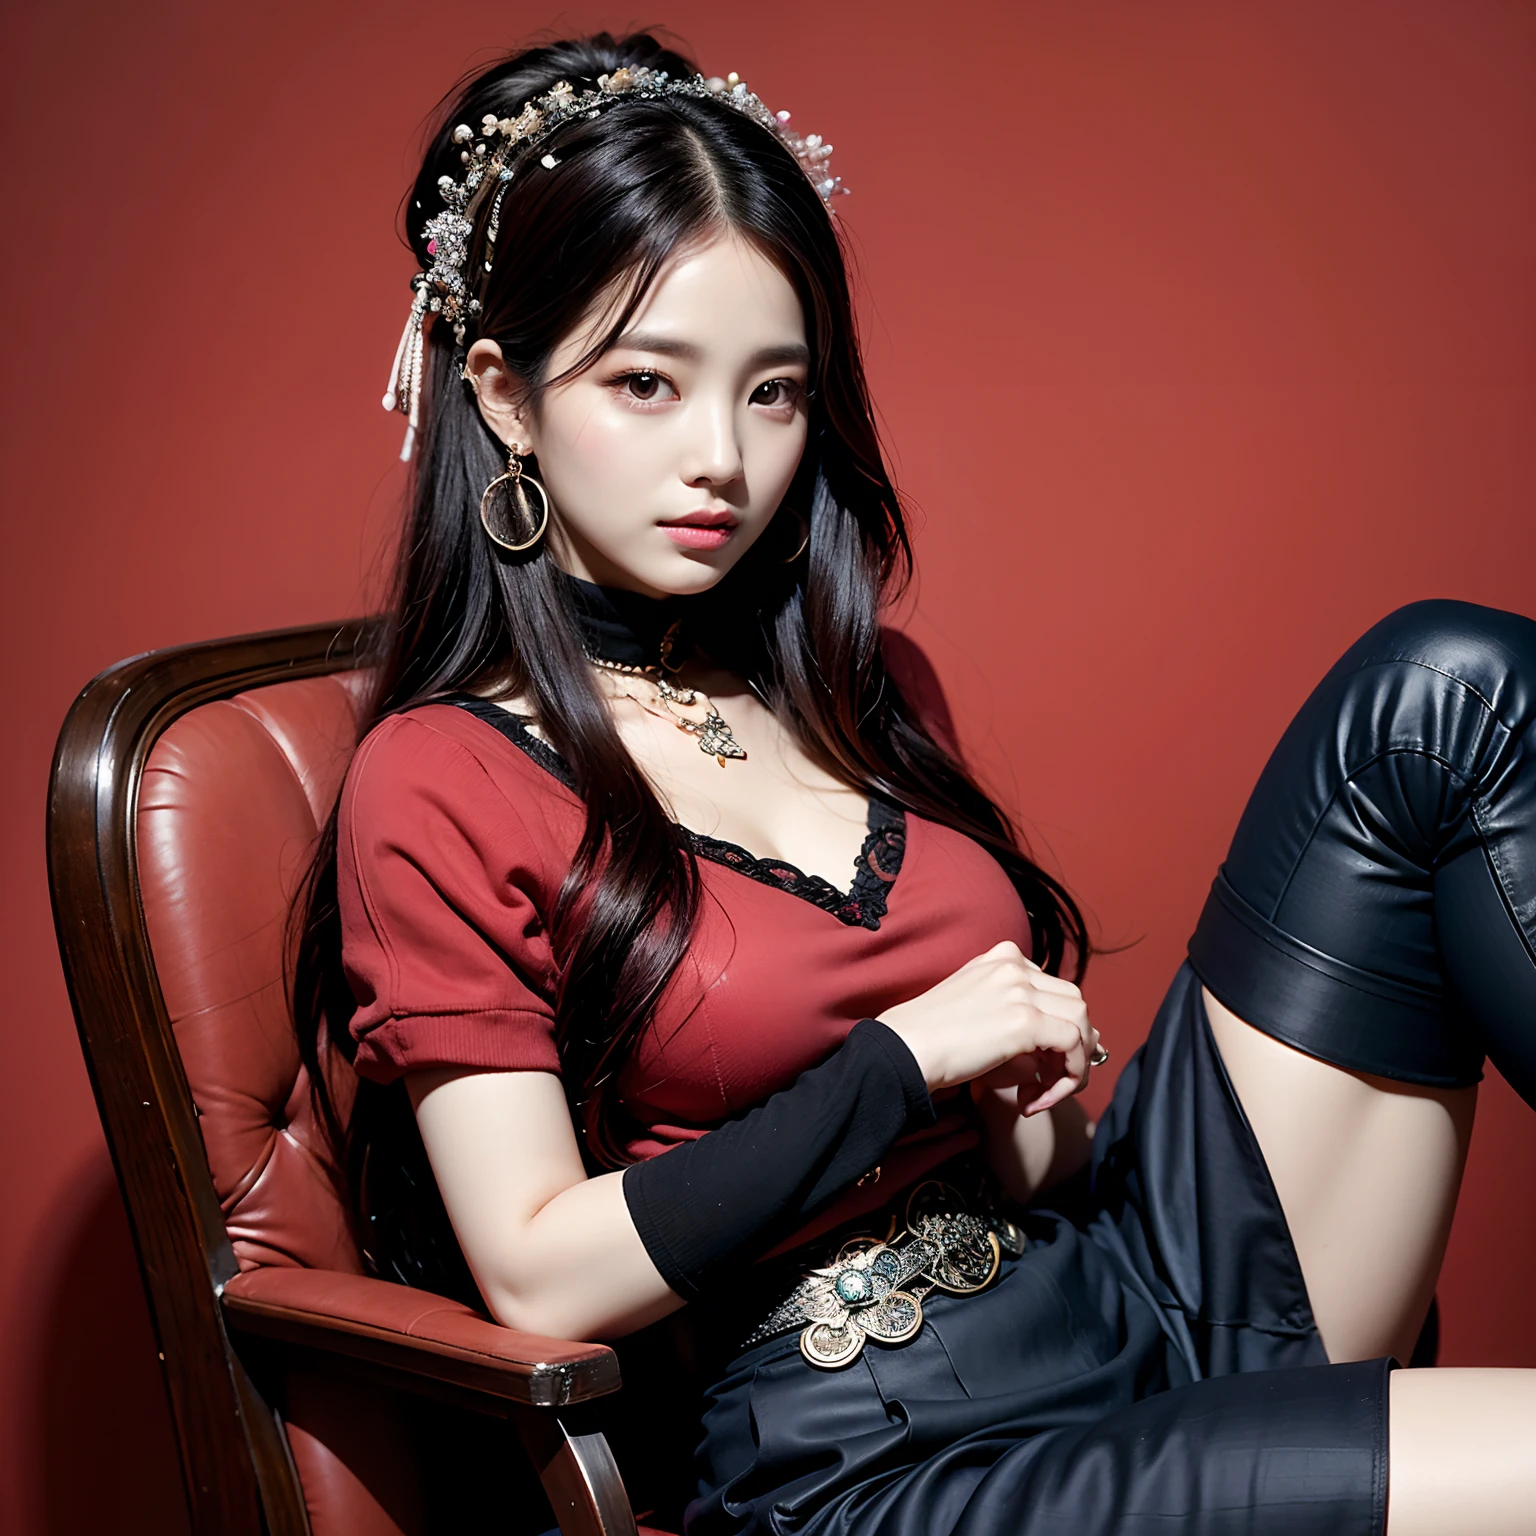 a Korean woman with very long black hair poses for a very sensual